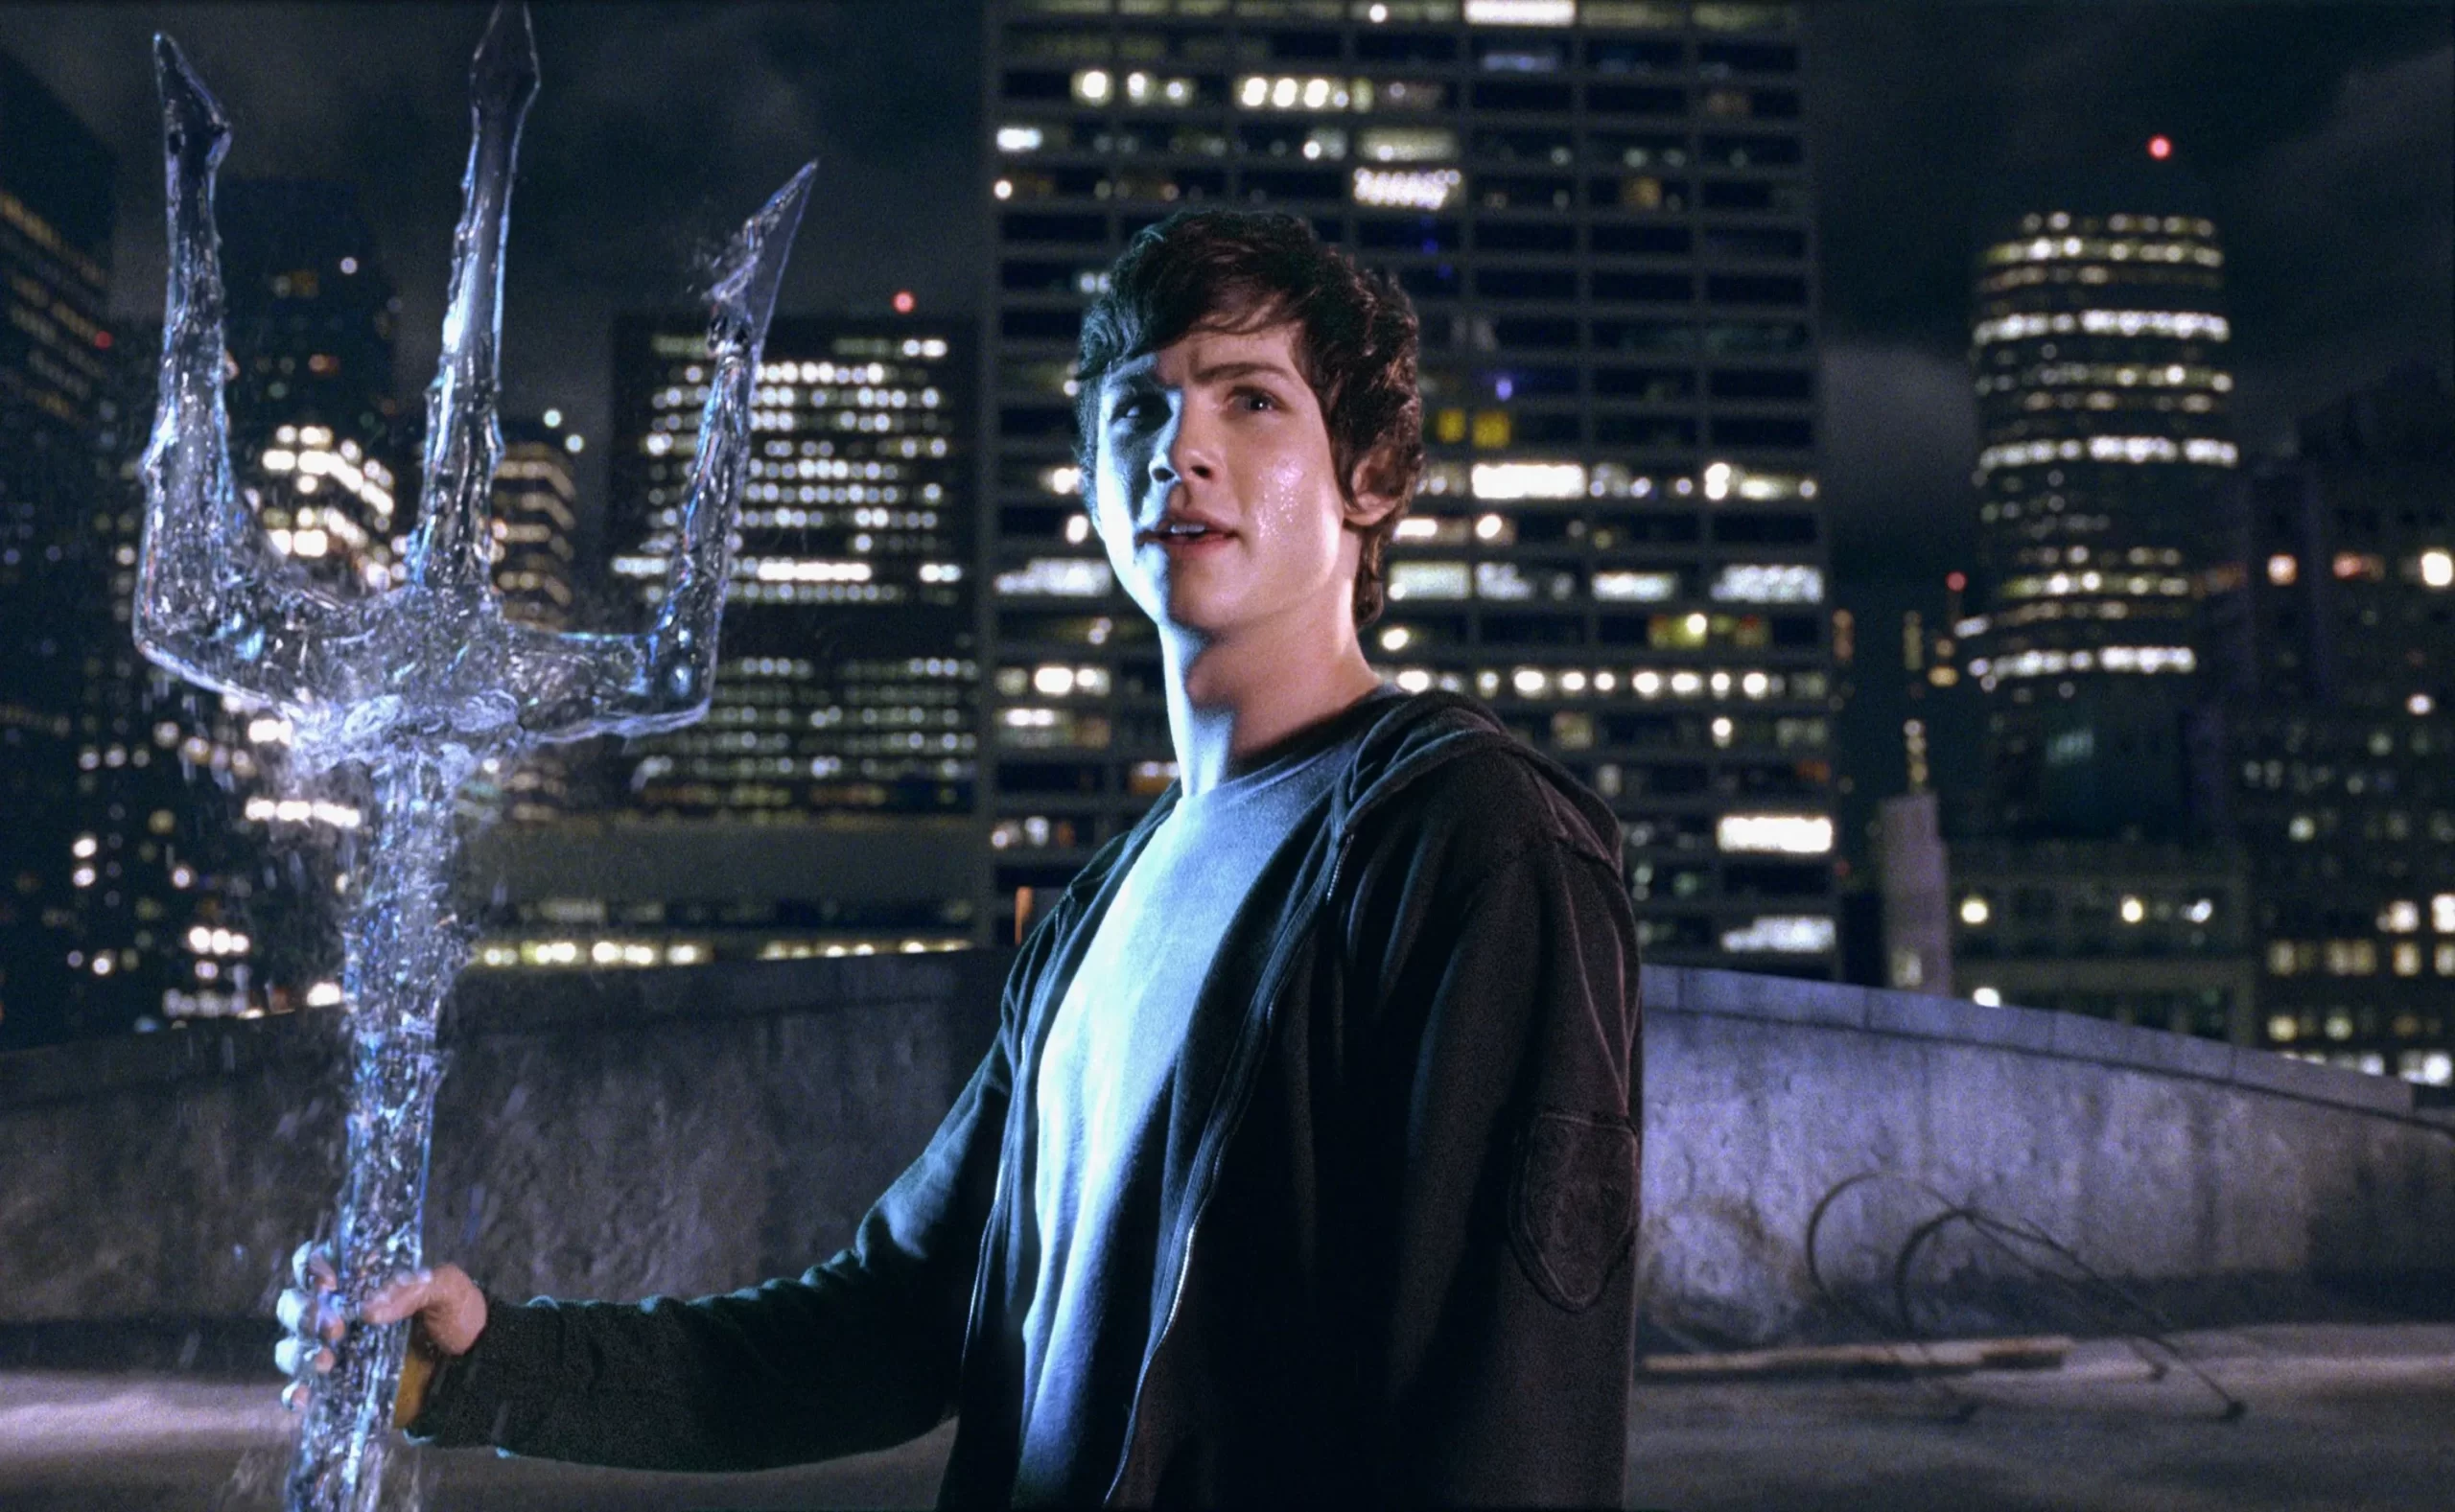 Percy Jackson holding a trident. Columbus, Chris, Percy Jackson And The Olympians: The Lightning Thief. 2010. Based on the book of the same name.